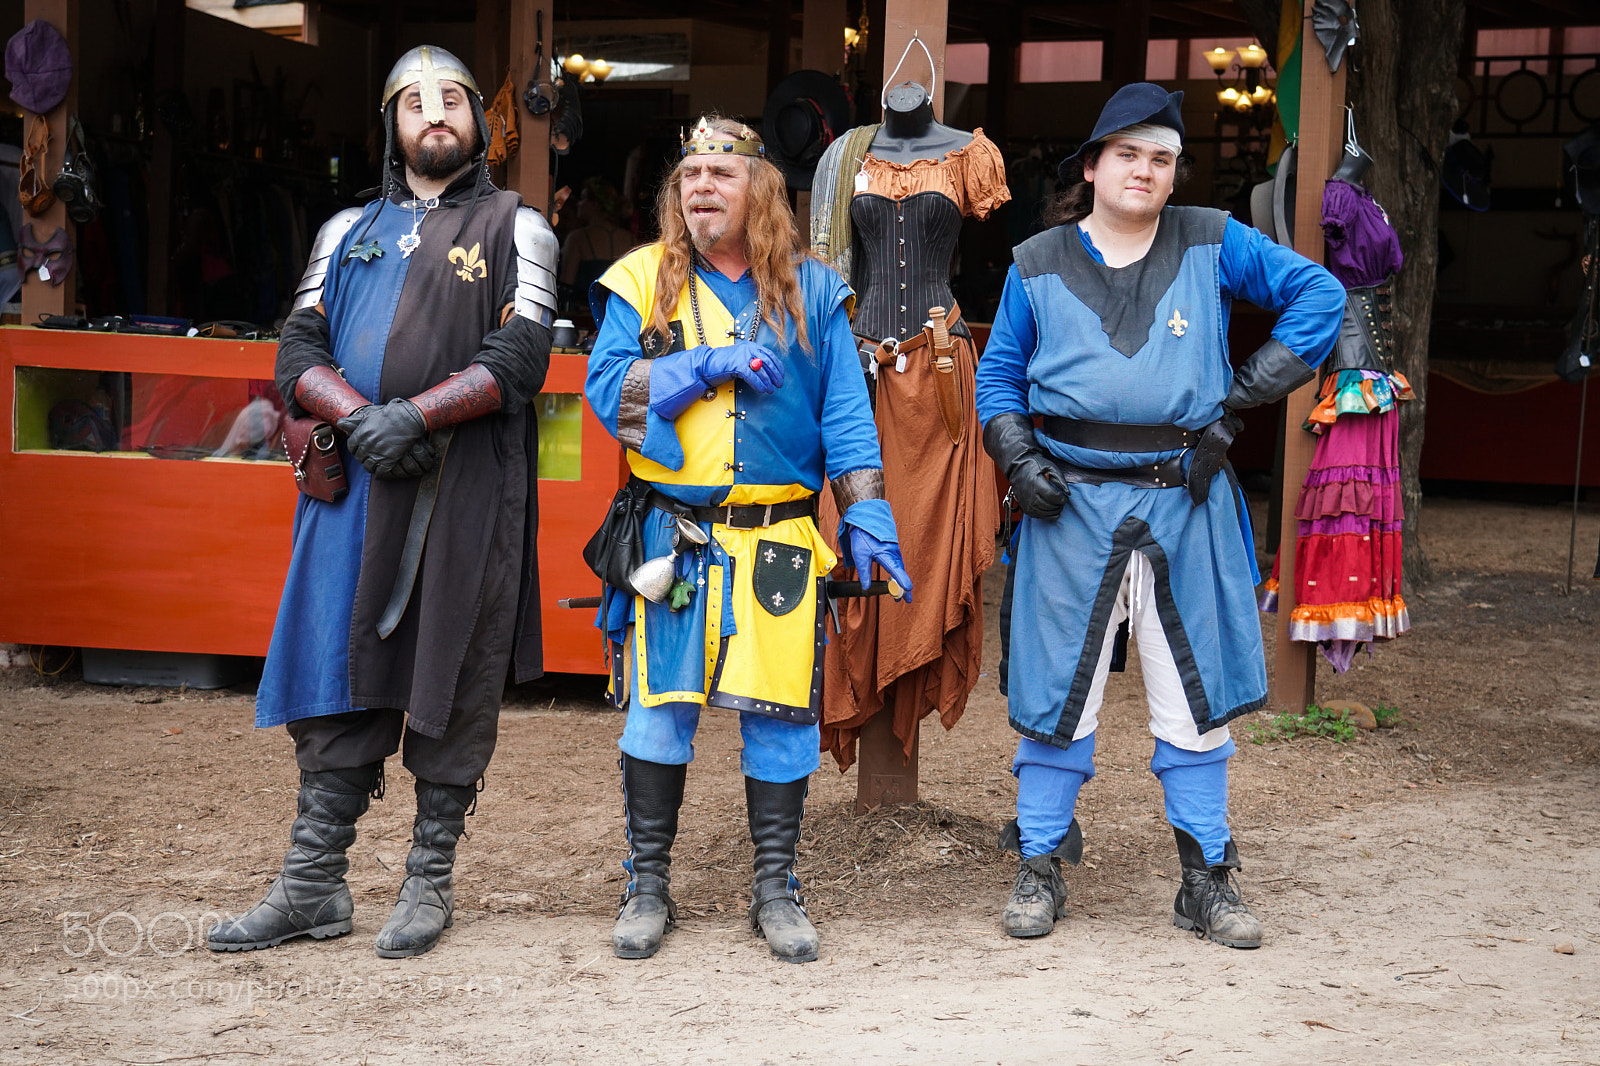 Sony a6500 sample photo. Sherwood forest faire photography